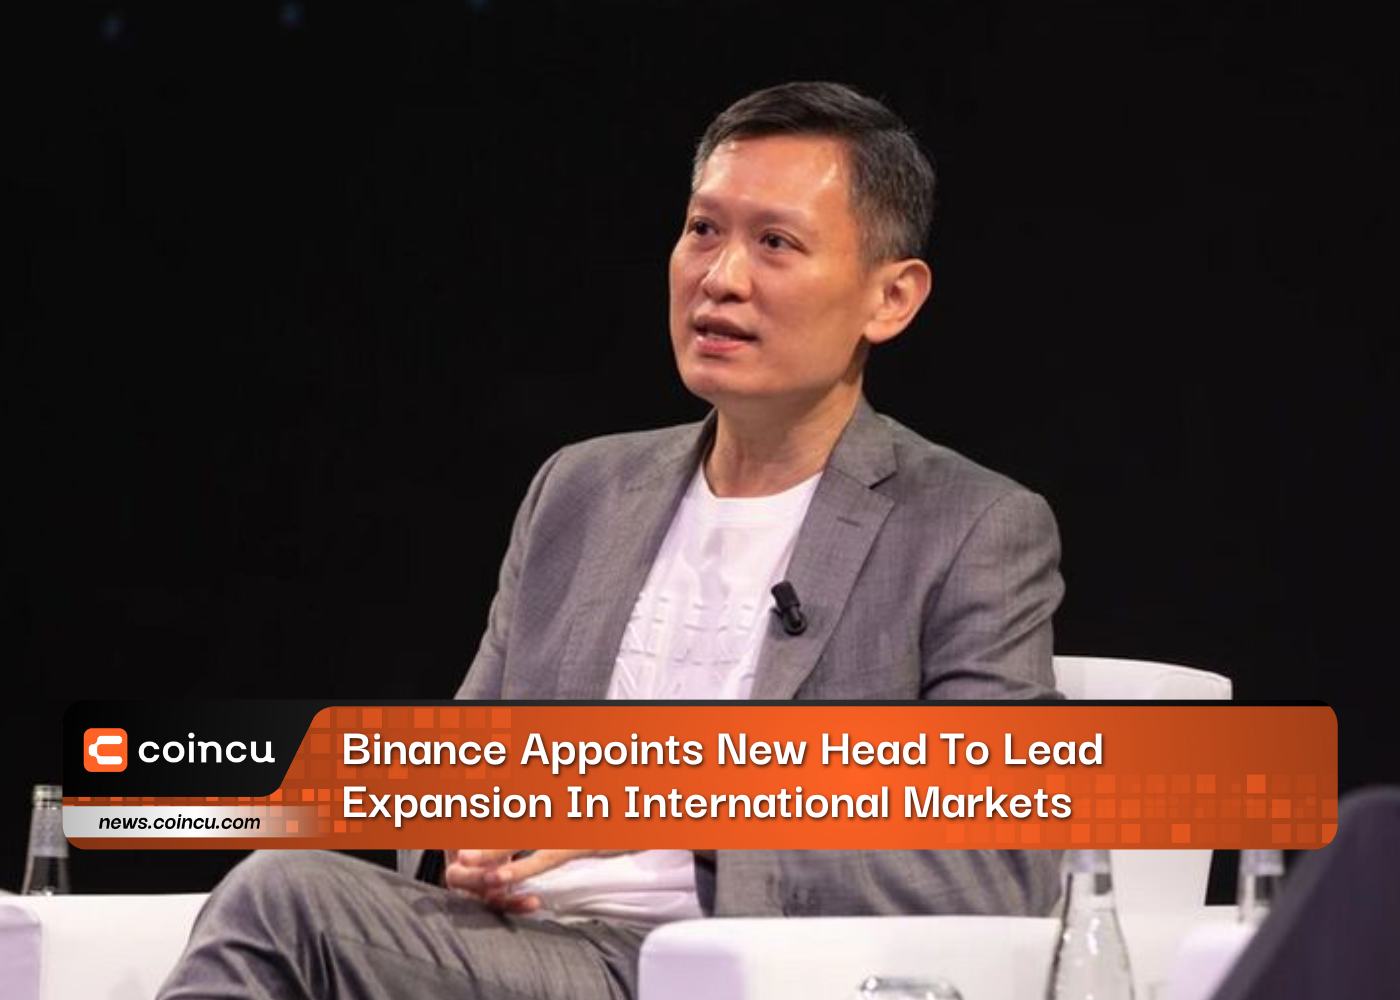 Binance Appoints New Head To Lead Expansion In International Markets